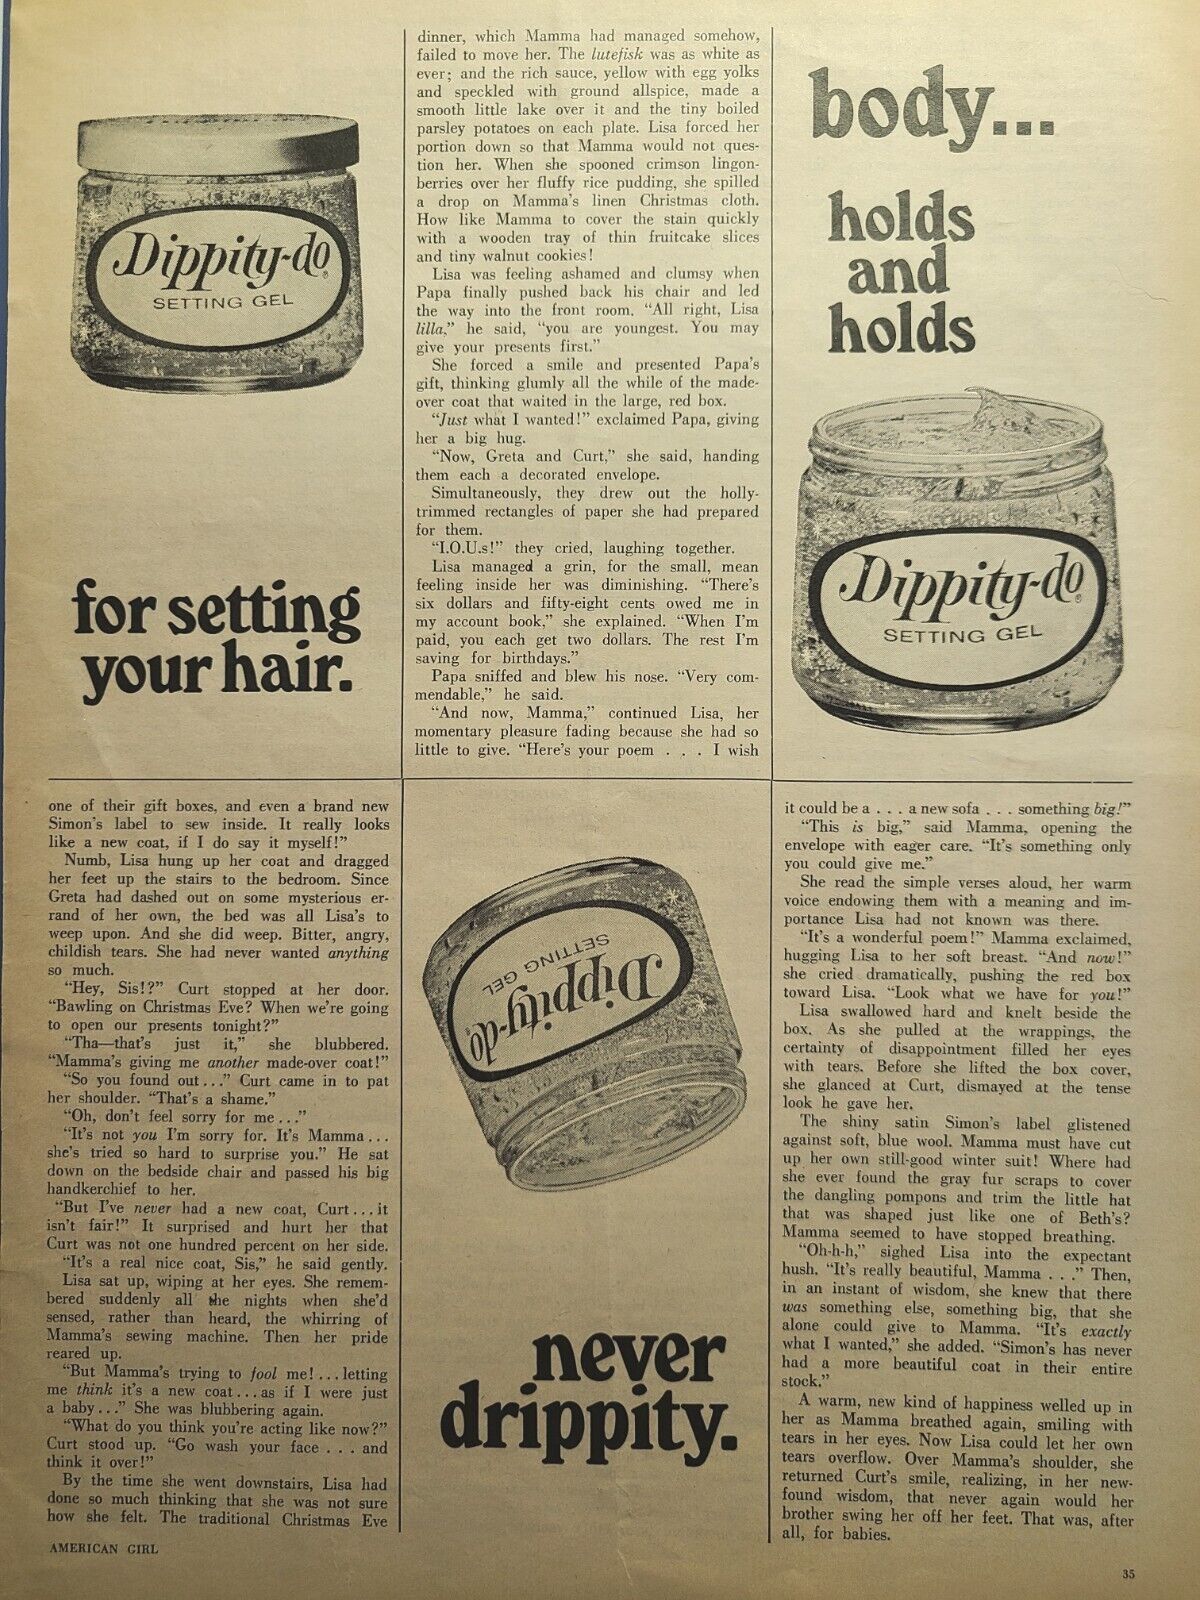 Dippity-do Setting Gel Hair Style Holds Cosmetology Vintage Print Ad 1965